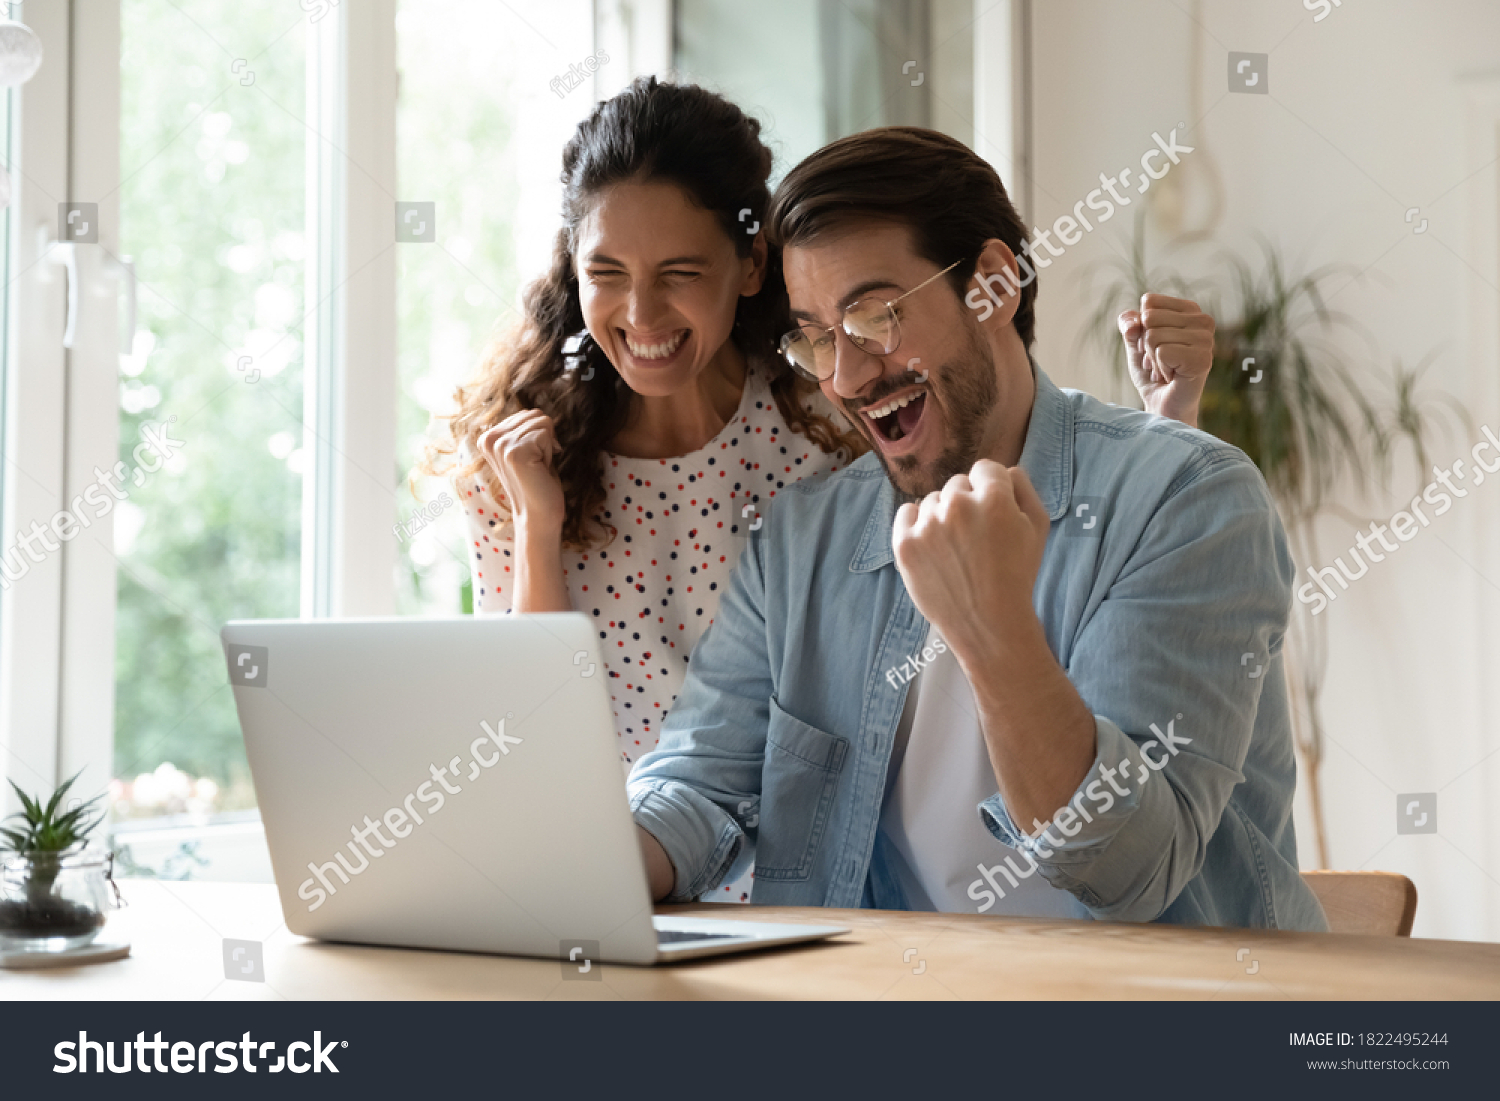 Overjoyed millennial man and woman triumph win online lottery on laptop. Happy excited young Caucasian couple feel euphoric with good email, get amazing sale offer or discount deal on computer. #1822495244